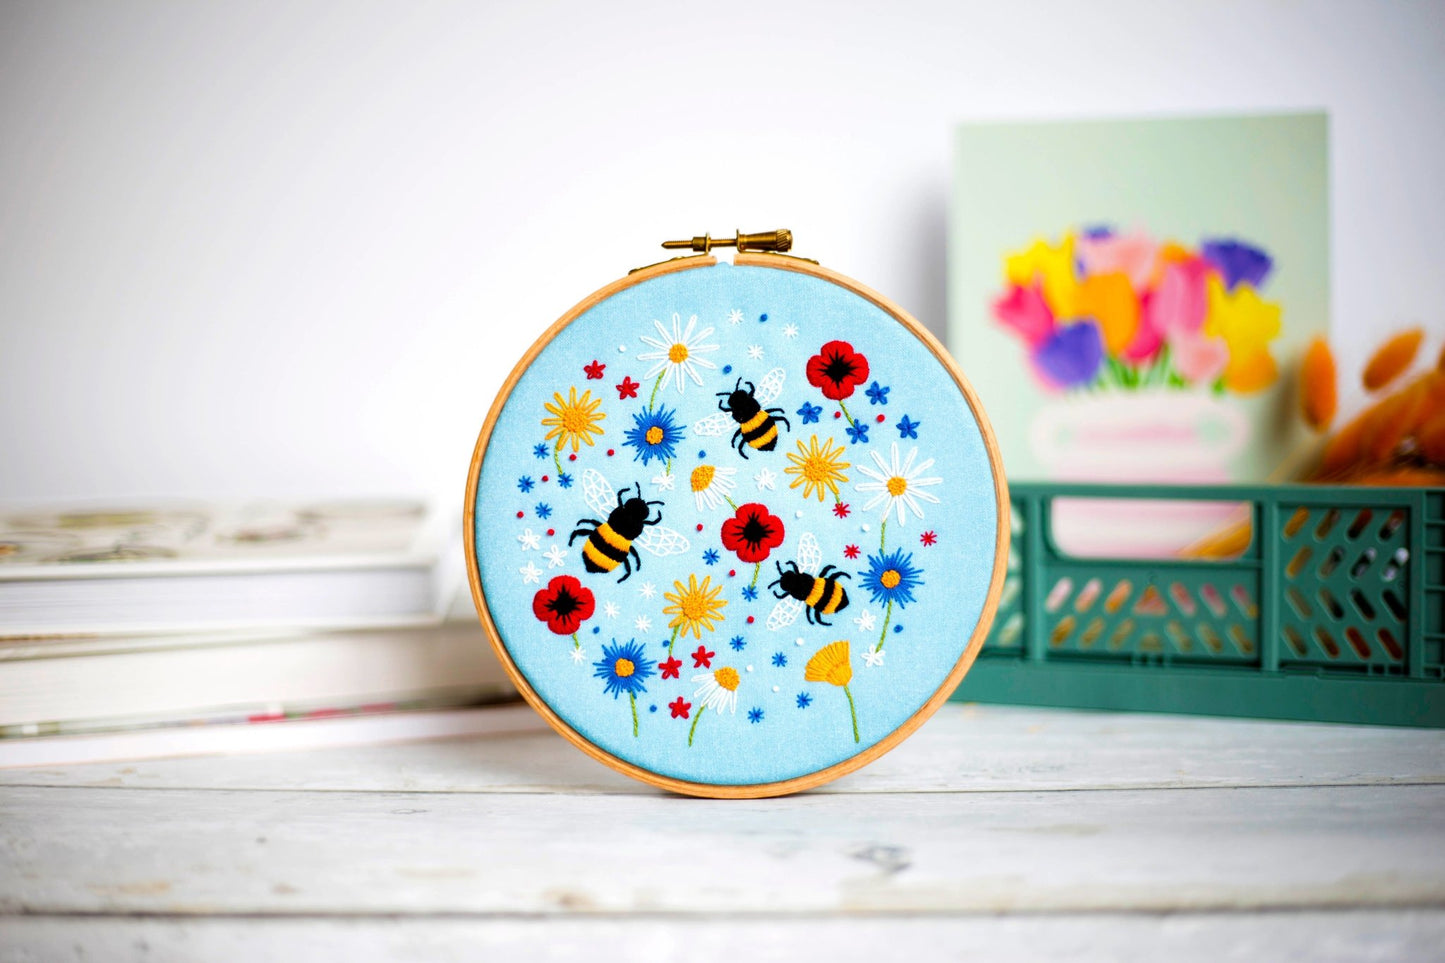 Oh Sew Bootiful - Bees and Wildflowers Handmade Embroidery Kit Hoop Art